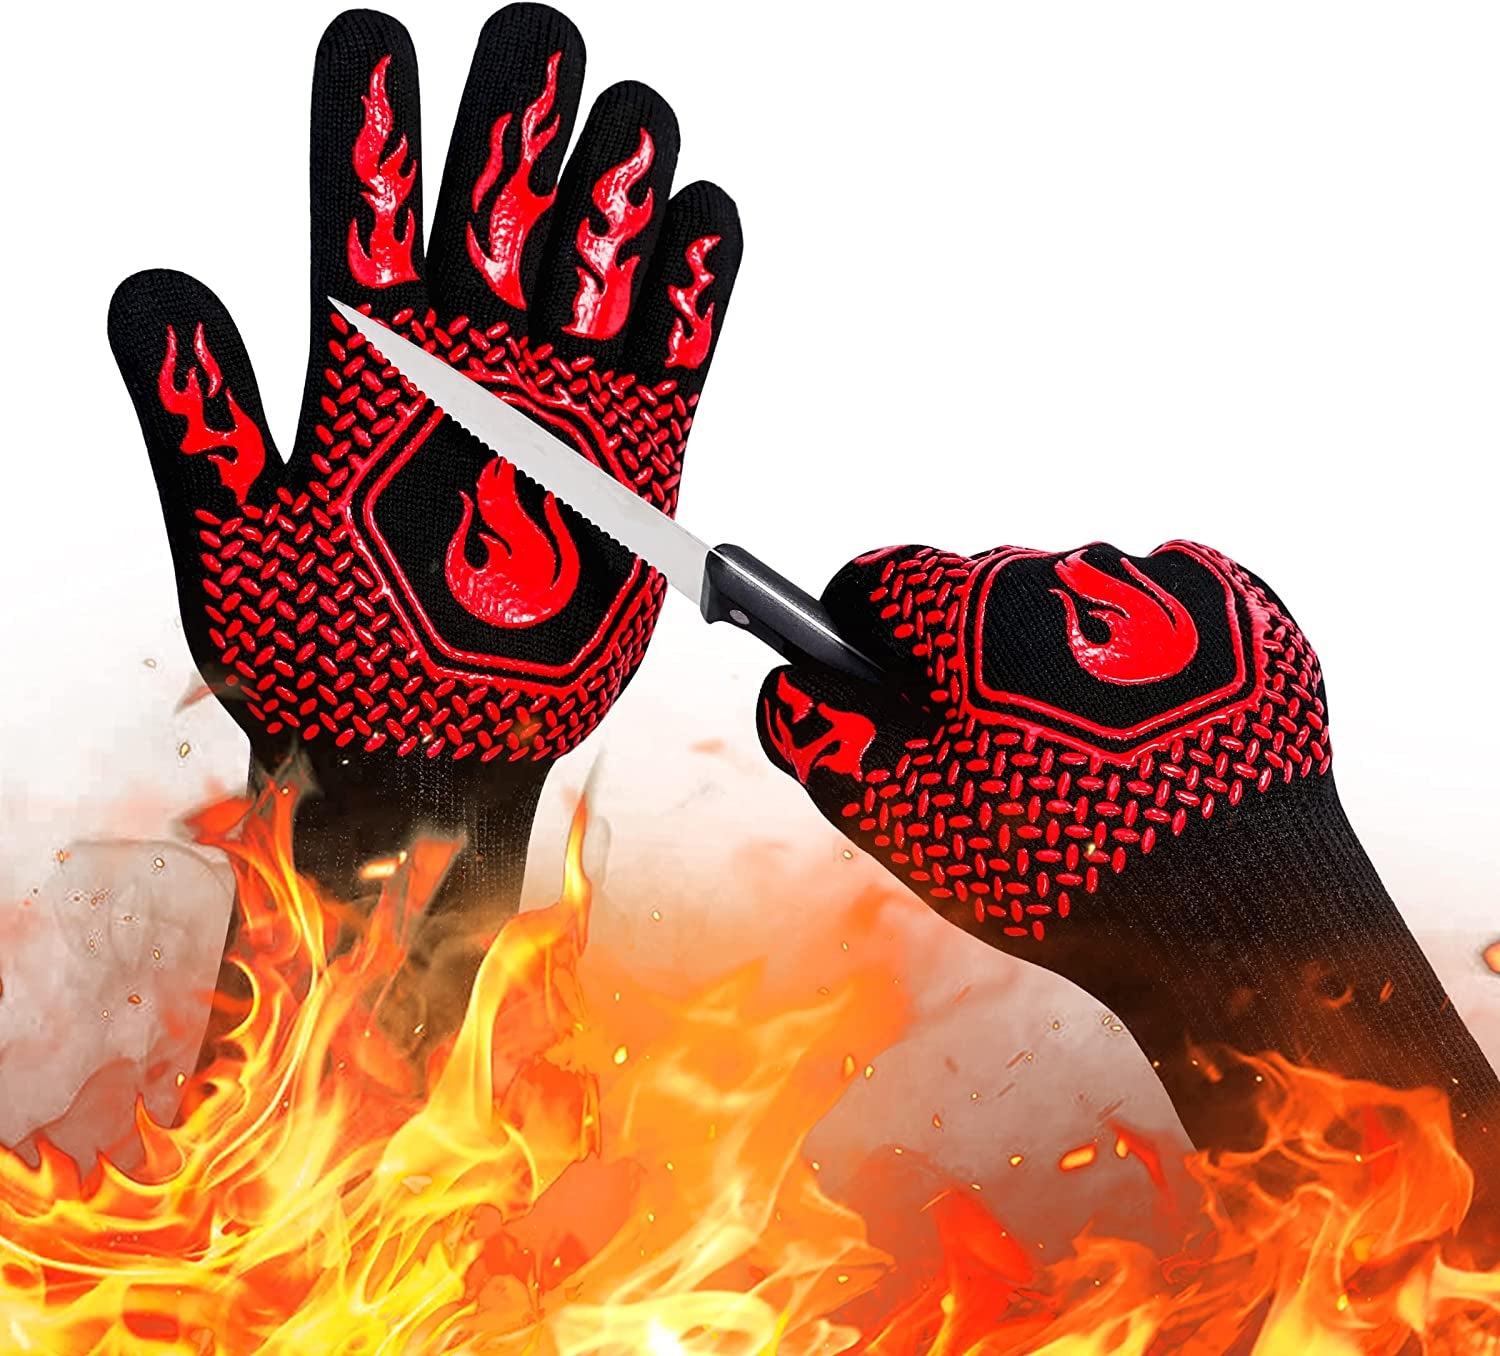 Best Oven Gloves for high Temperature, Baking Gloves, Heat-Resistant  Gloves, Grill Gloves, BBQ Gloves, Cooking Gloves. Oven Mitts, Kitchen Hand